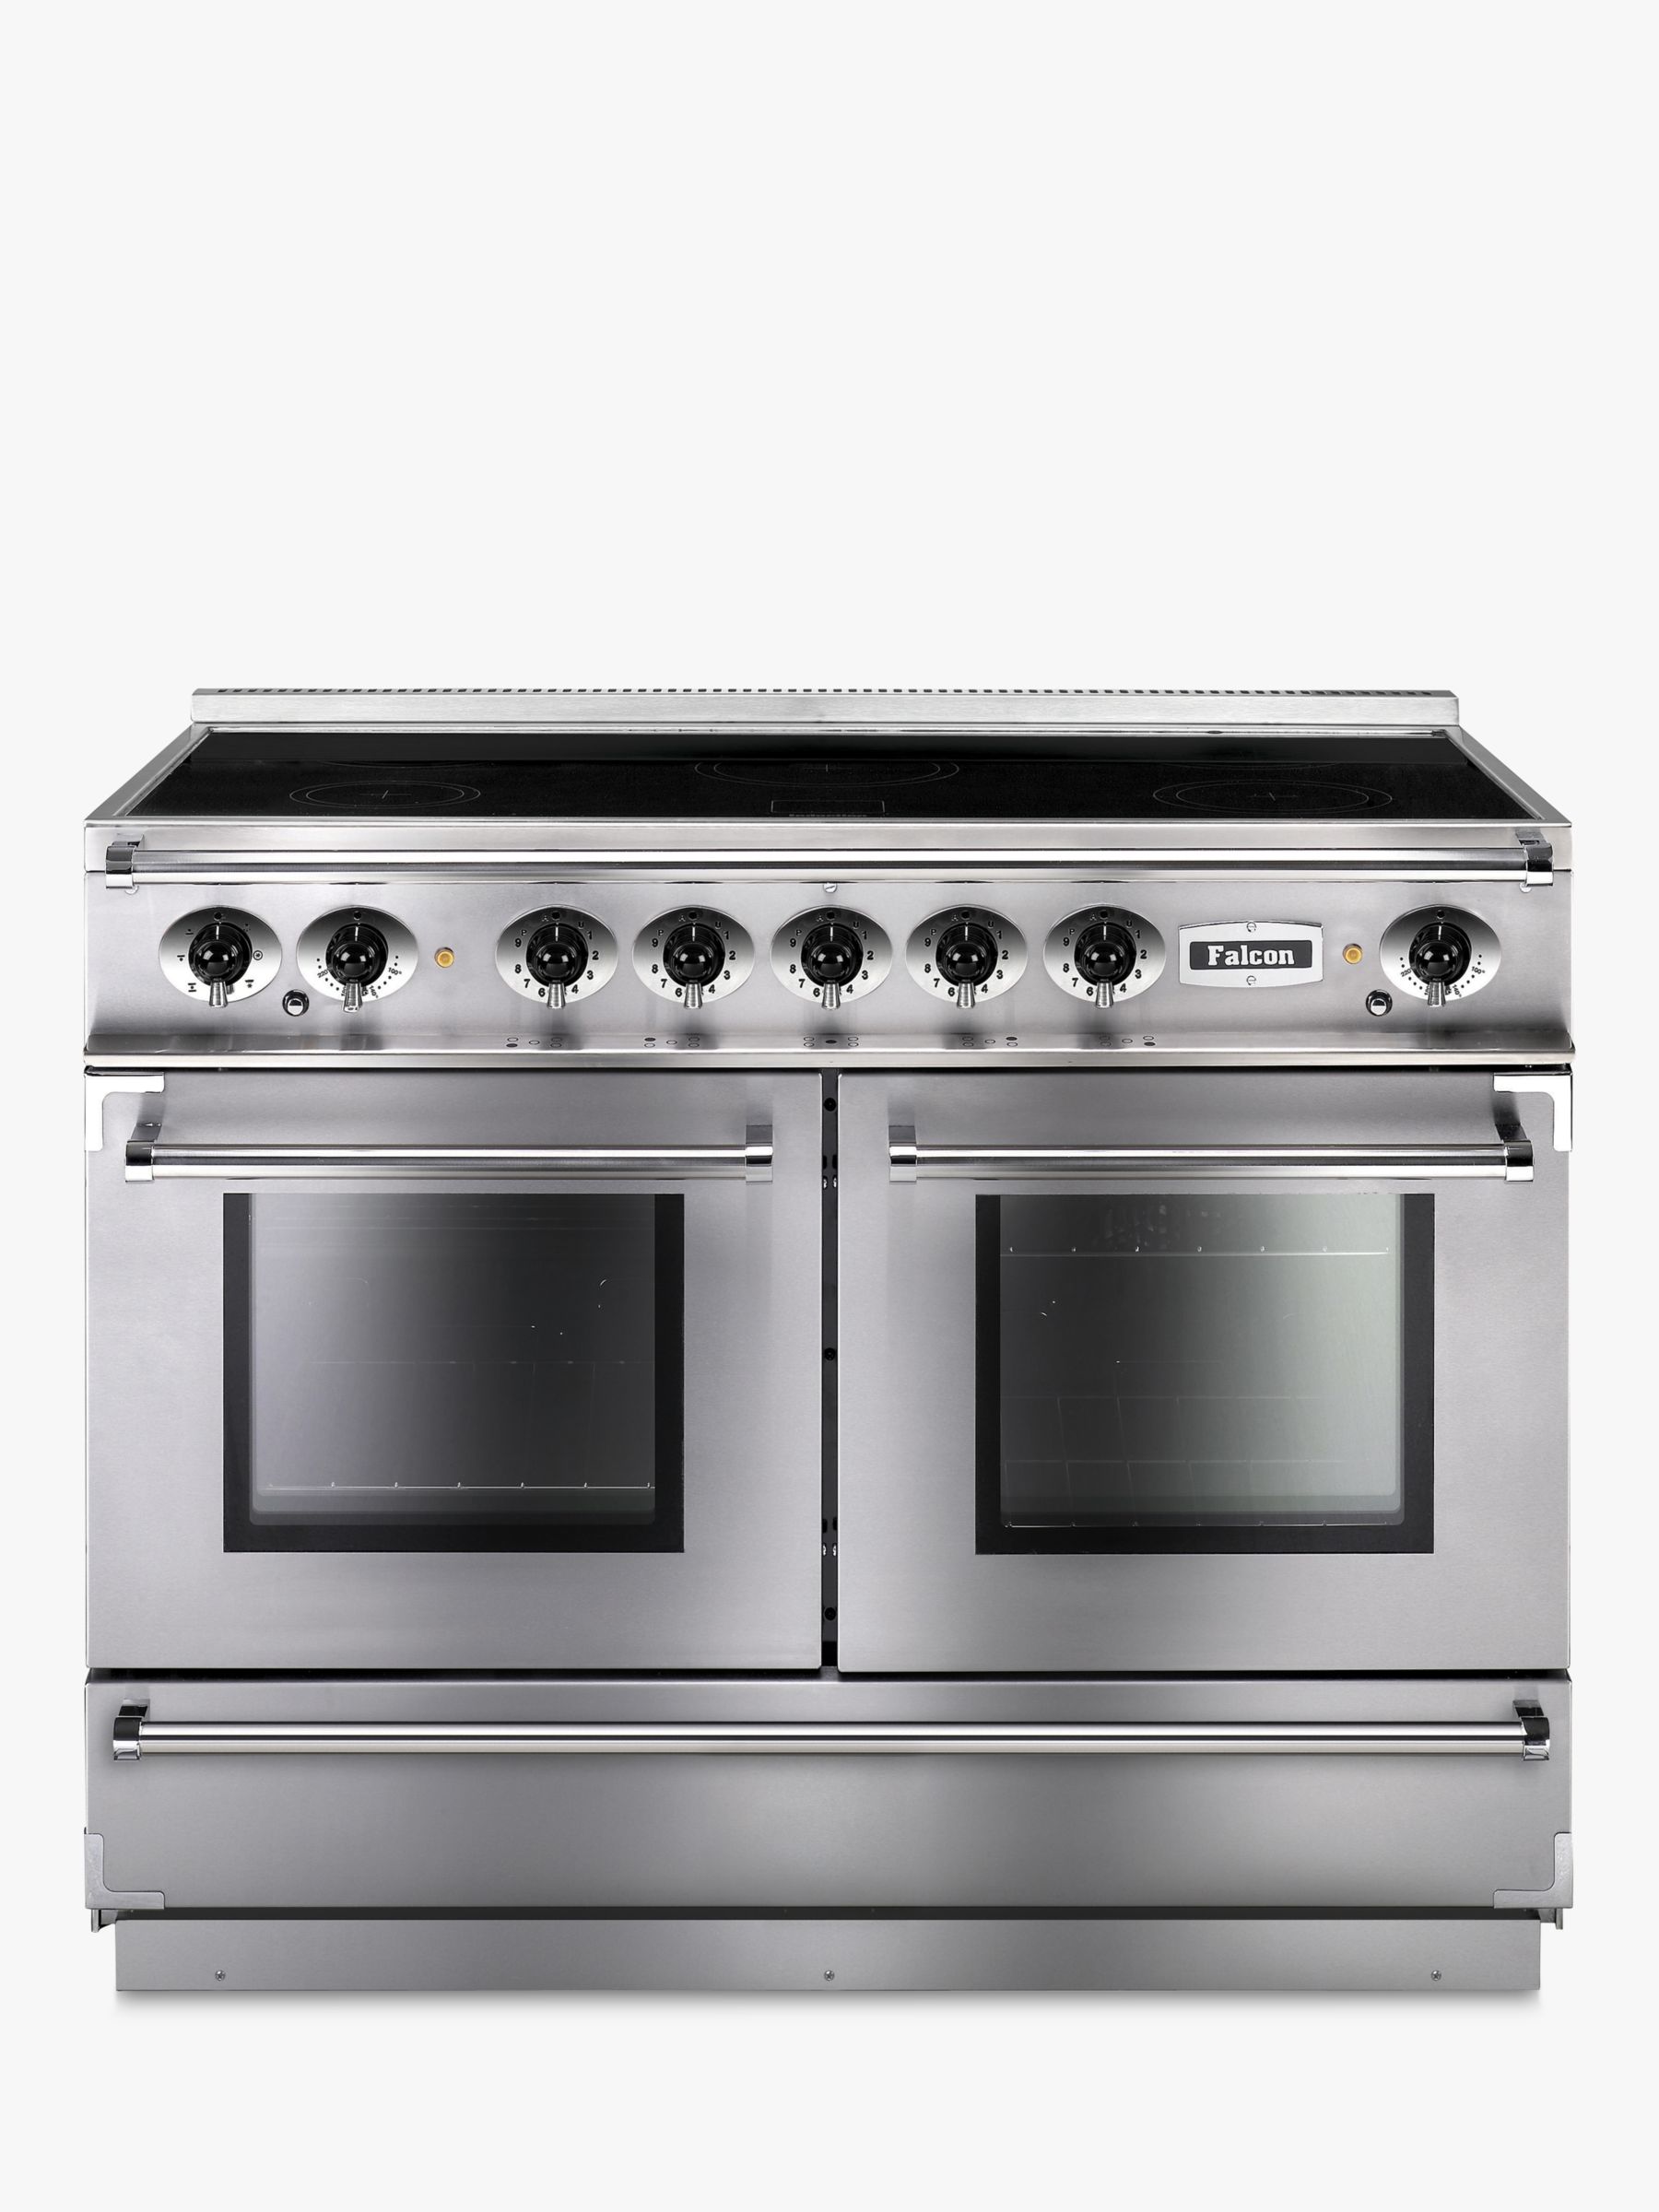 Falcon Continental 1092 ECBL/C-EU Induction Hob Range Cooker, Stainless Steel & Chrome at John Lewis